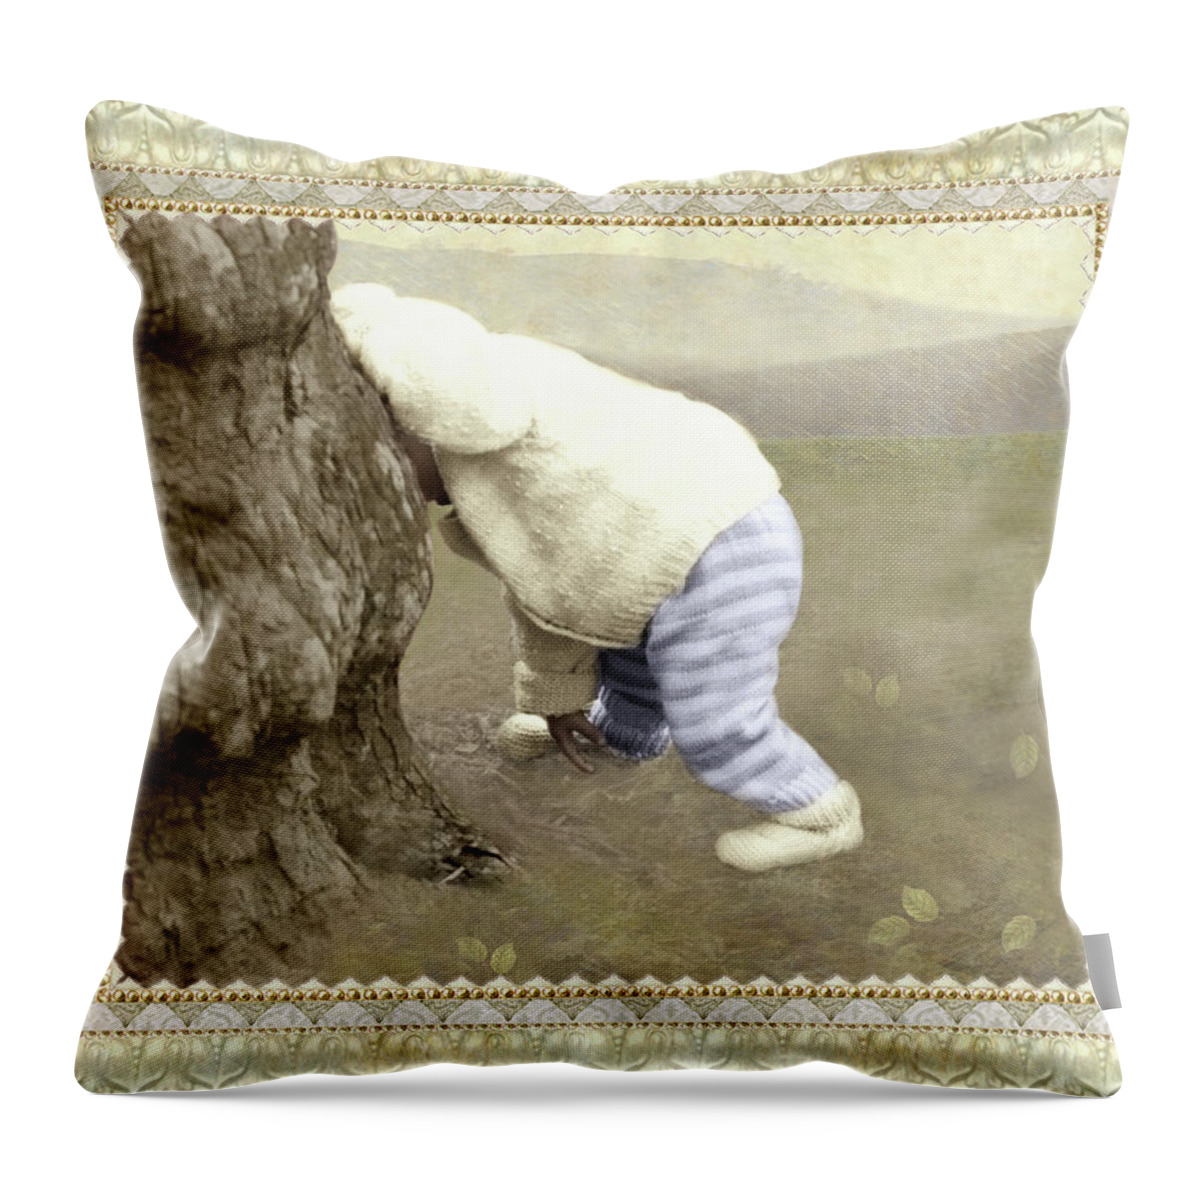  Throw Pillow featuring the photograph Is Bunny Behind Tree? by Adele Aron Greenspun